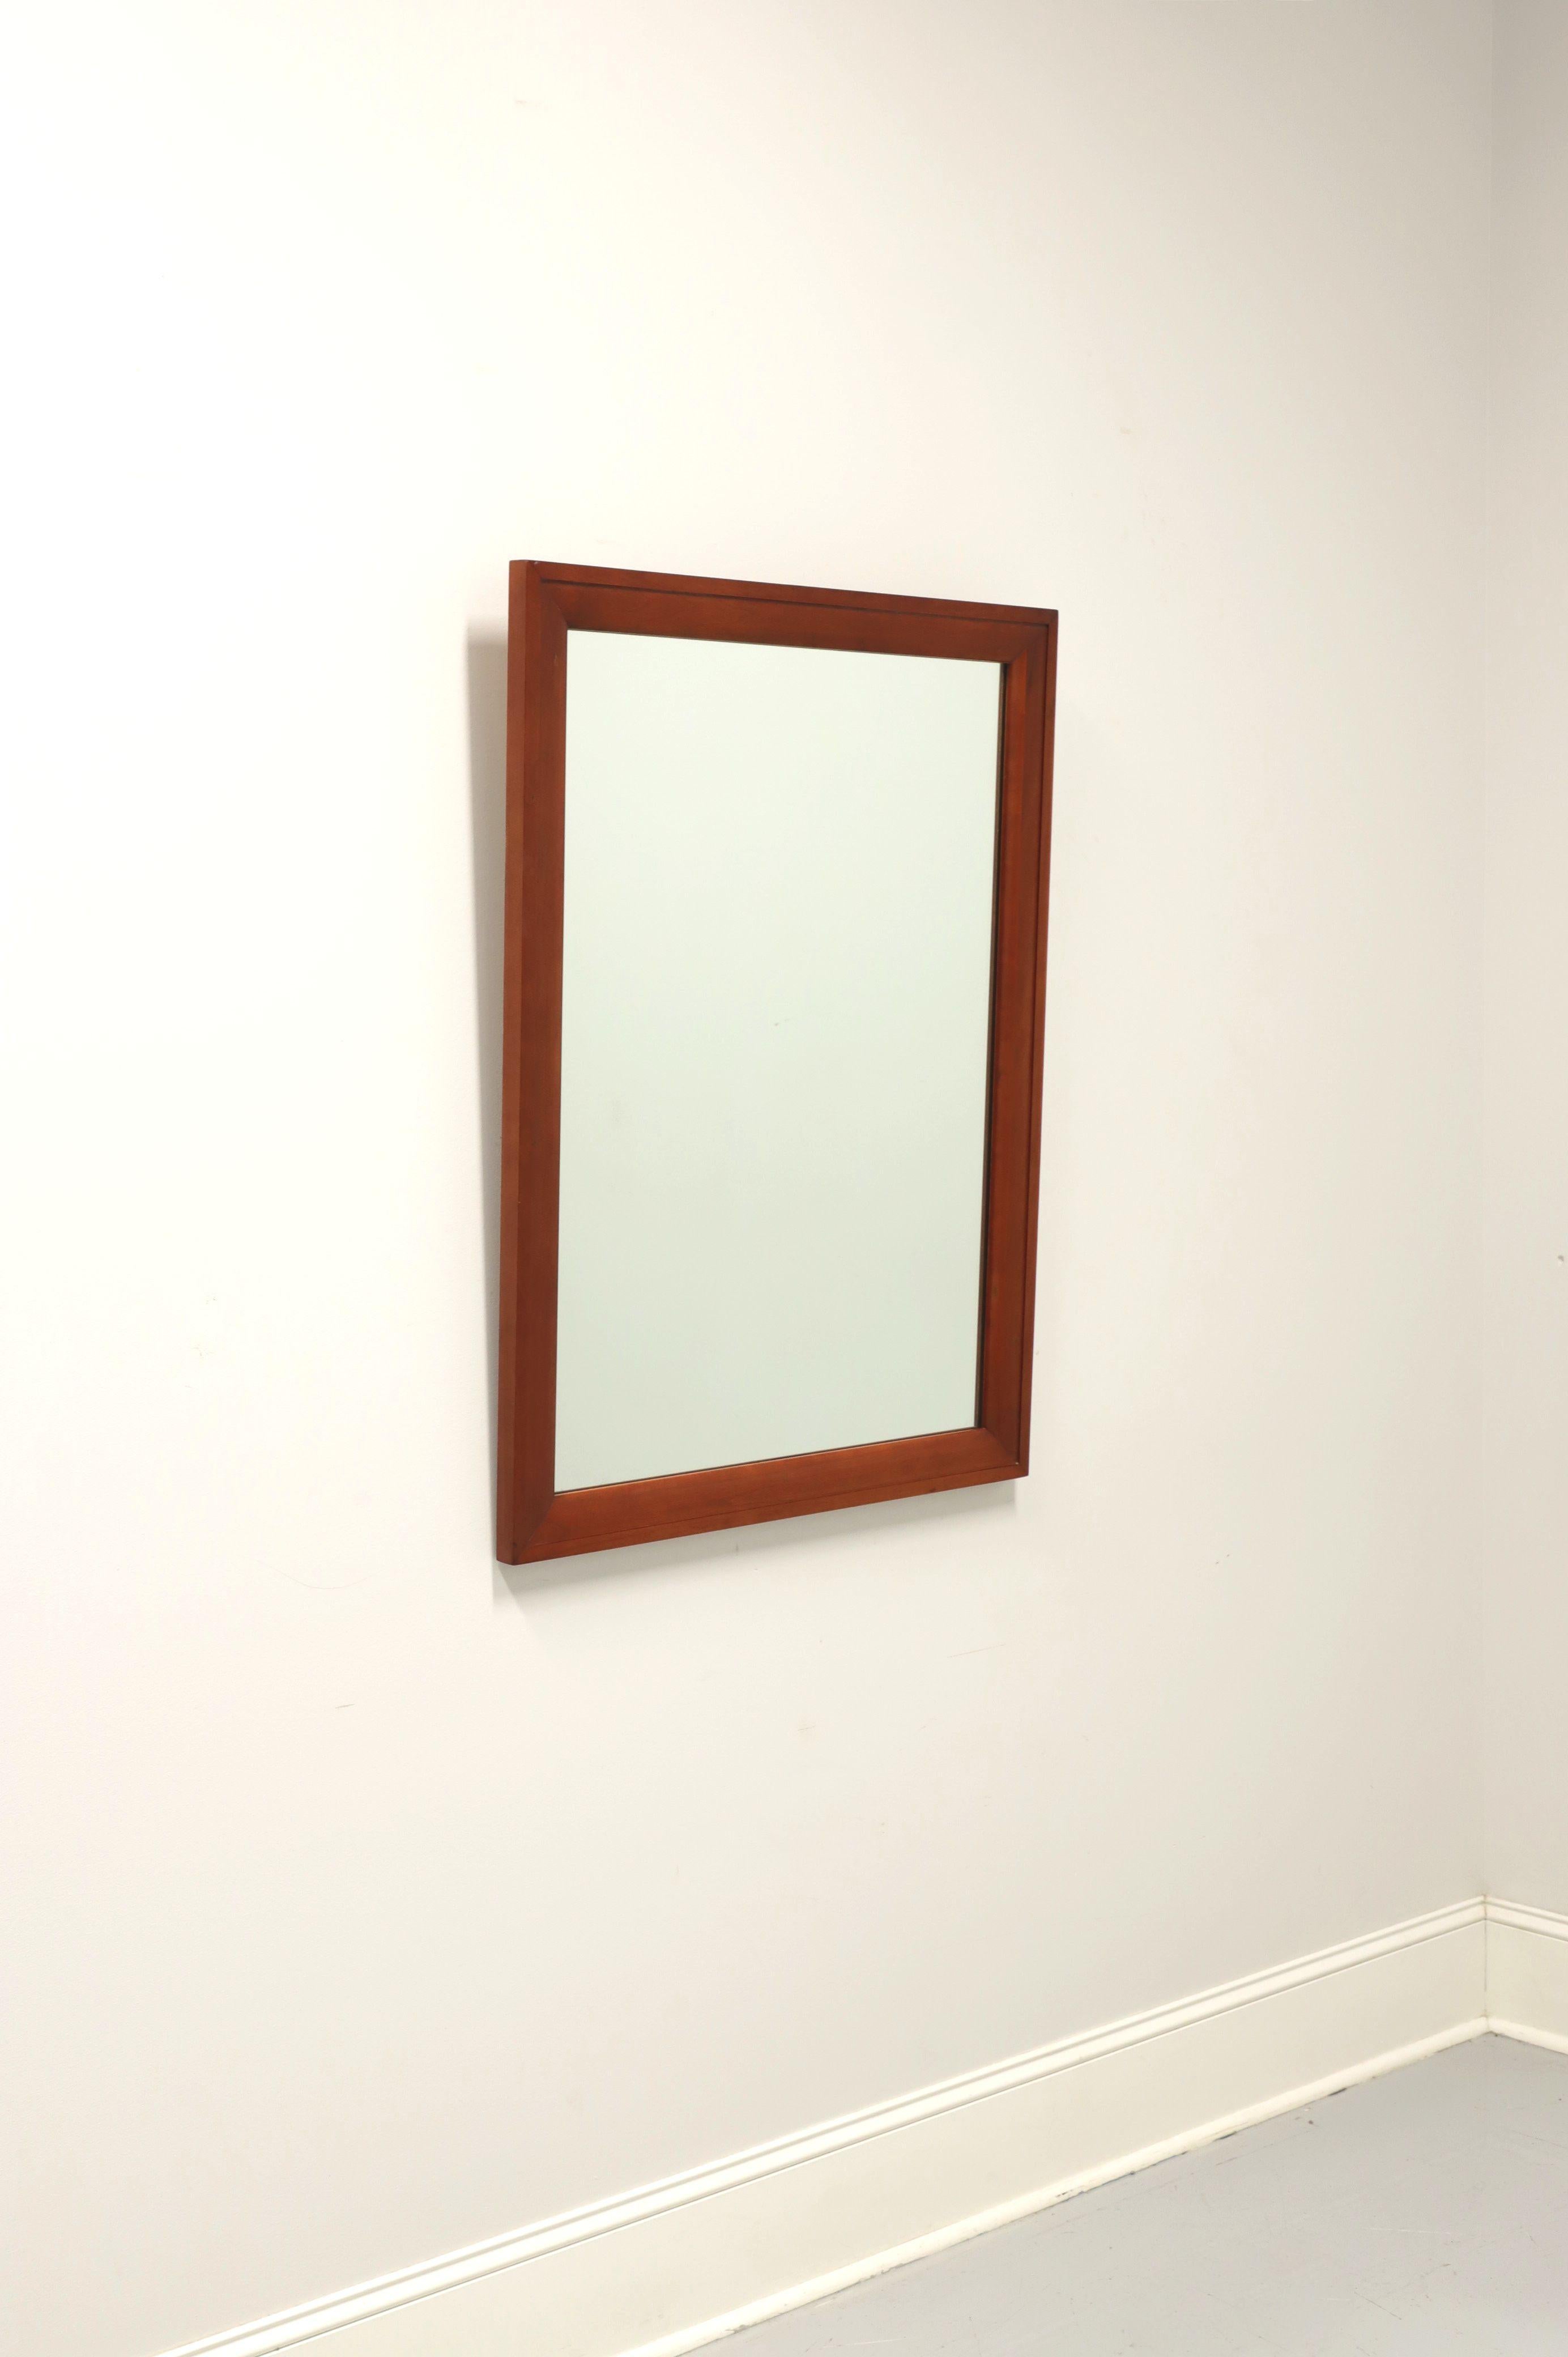 A Mid Century dresser or wall mirror by Willett Furniture, of Louisville, Kentucky, USA. Mirrored glass in a rectangular solid cherry frame. Made in the mid 20th Century.

Measures: 30.25W 1.25D 40.25H, Weighs Approximately: 32 lbs

Exceptionally